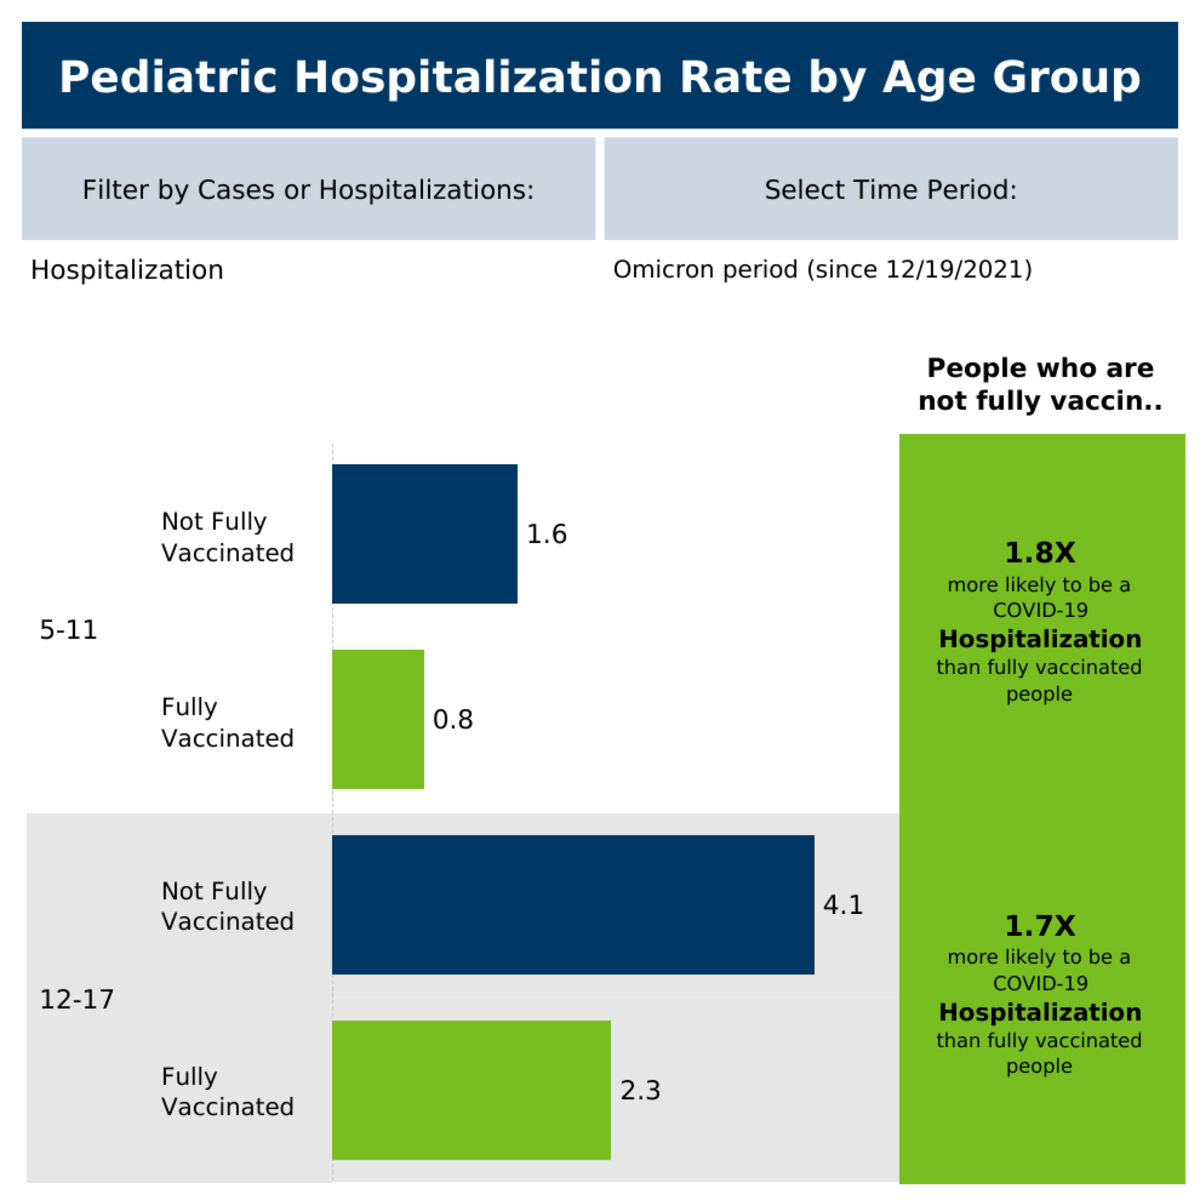 The column on the left represents age group hospitalizations per 100,000 people. For example, Minnesotans aged 5-11 who are not fully vaccinated have averaged 1.6 hospitalizations per 100,000 people since Dec. 19, whereas fully vaccinated kids aged 5-11 have averaged 0.8 hospitalizations per 100,000 people during the same period. 